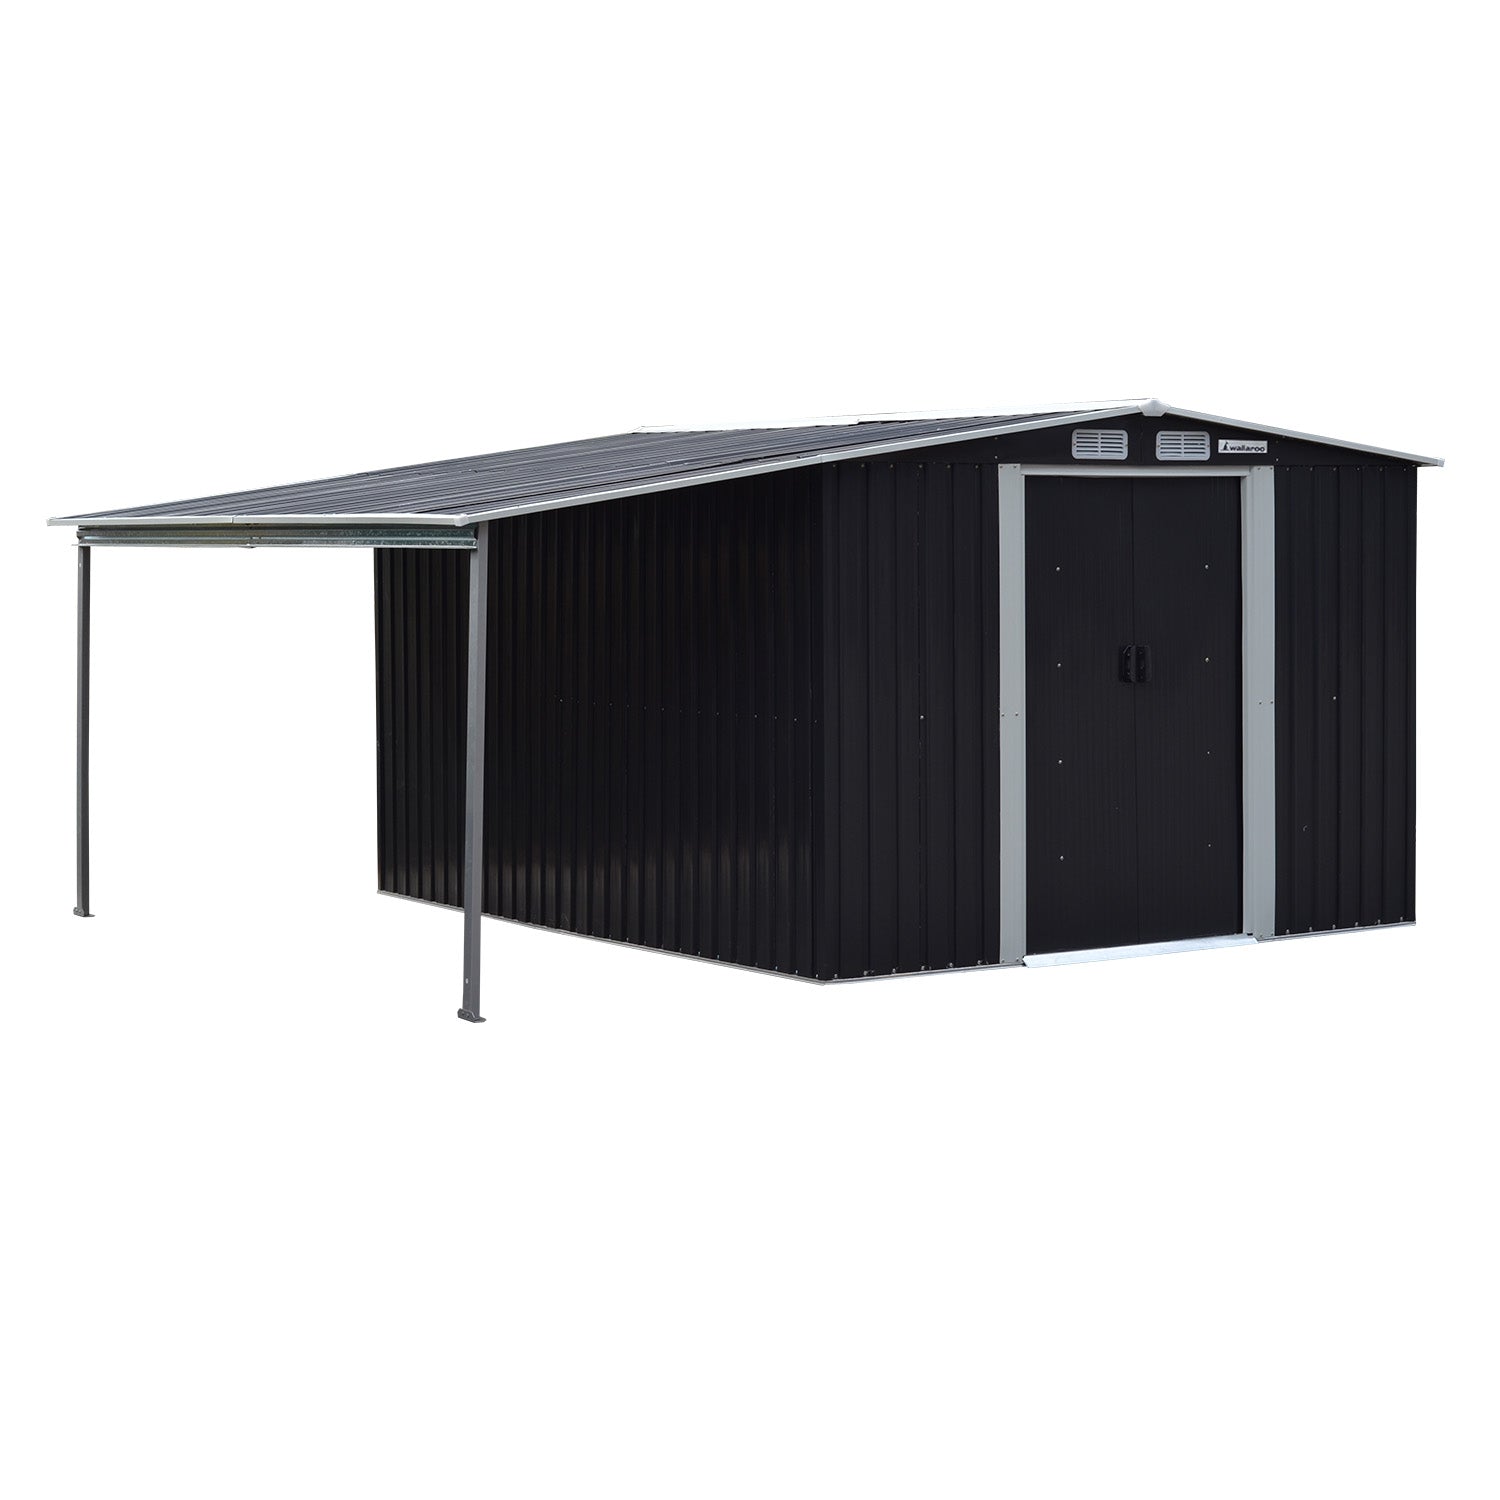 Shed Wallaroo 8ft x 8ft Zinc Steel Garden Shed with Open Storage Black